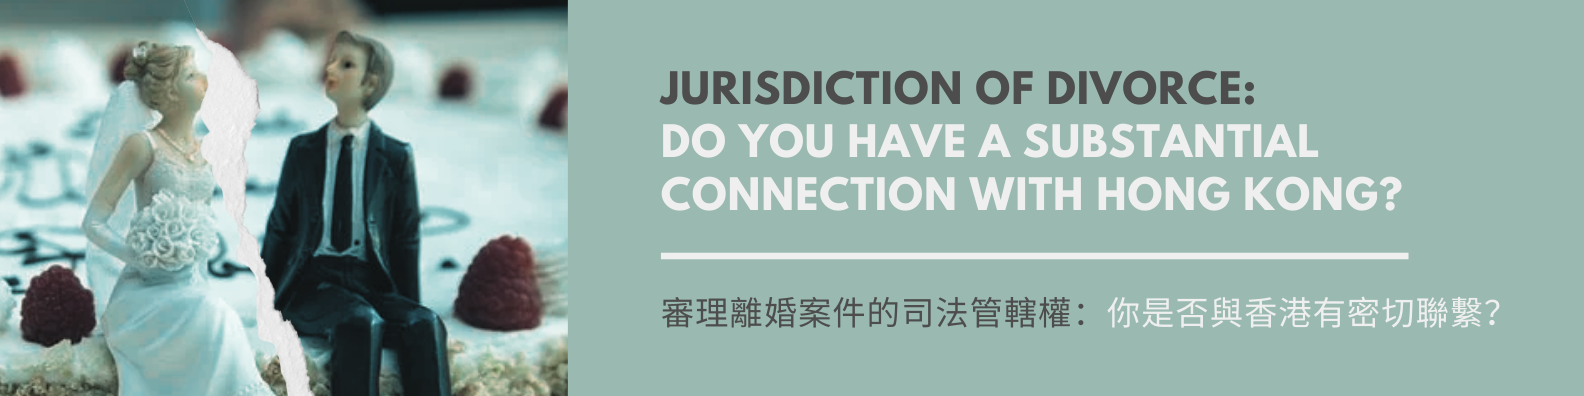 Jurisdiction of divorce:  Do you have a substantial connection with Hong Kong?